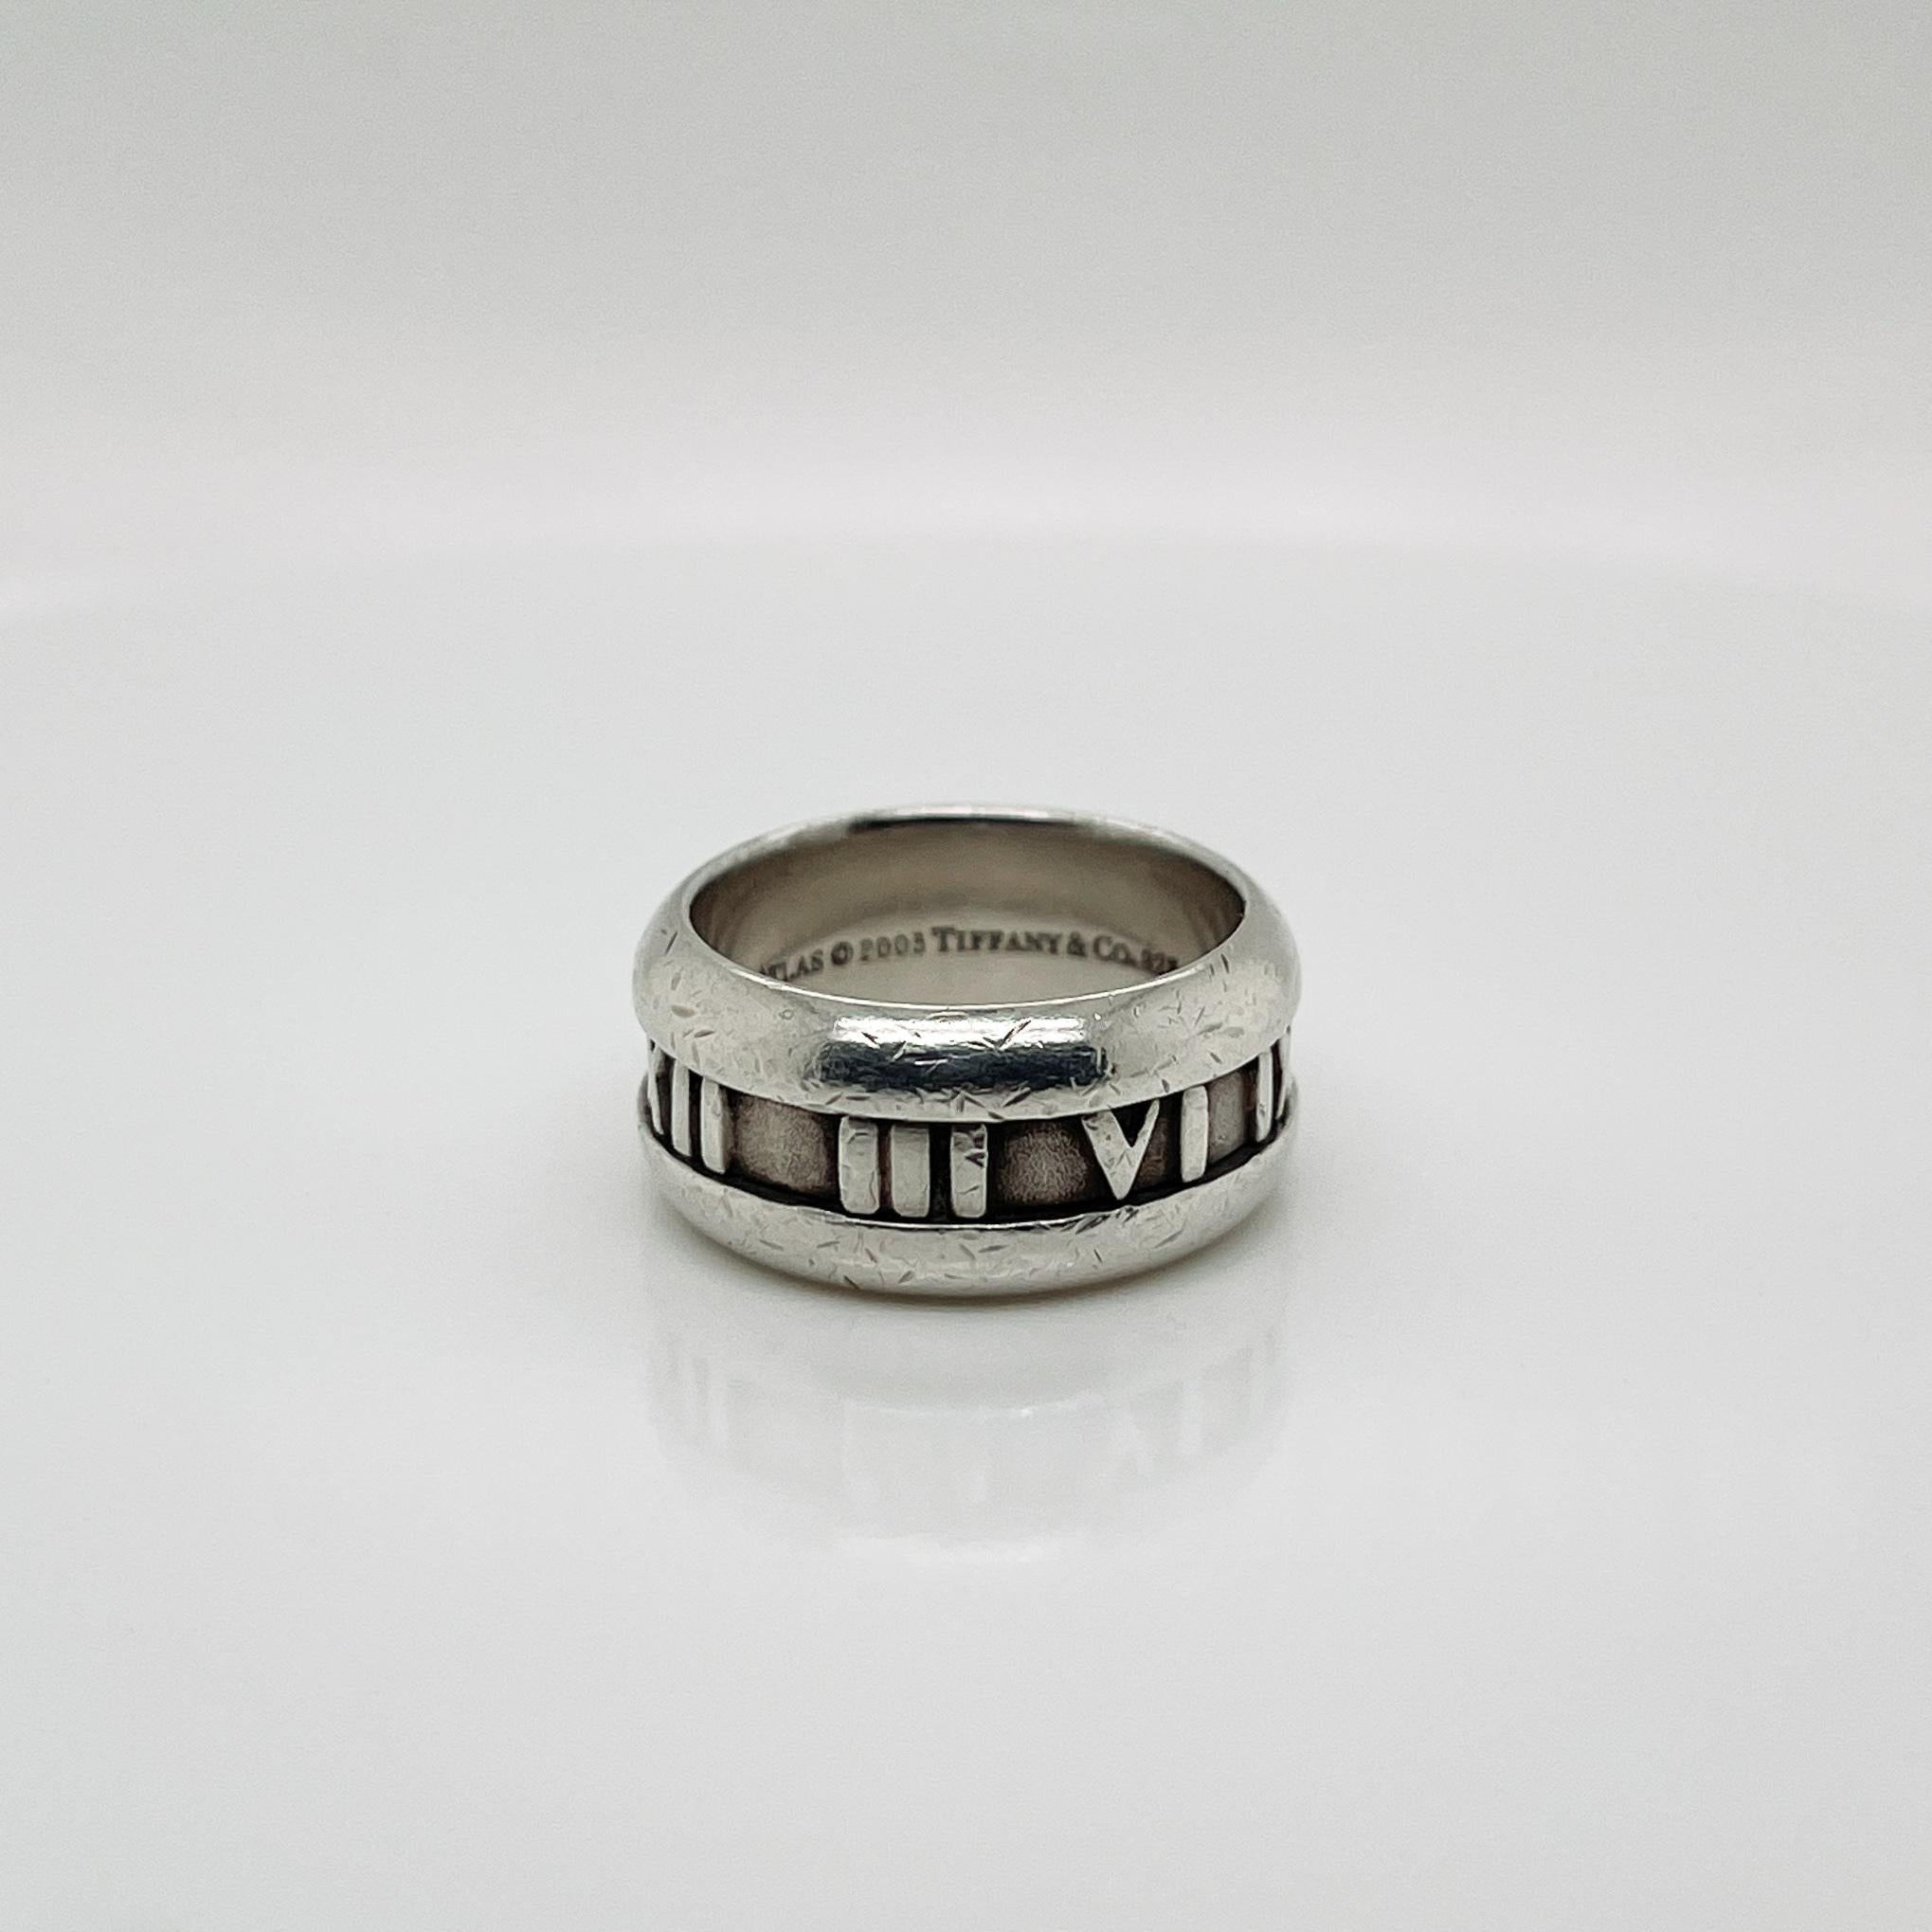 A fine modern sterling silver ring.

By Tiffany & Co.

In sterling silver.

In the Atlas pattern.

Simply a wonderful iconic ring from Tiffany!

Date:
2003

Overall Condition:
It is in overall good, as-pictured, used estate condition with light